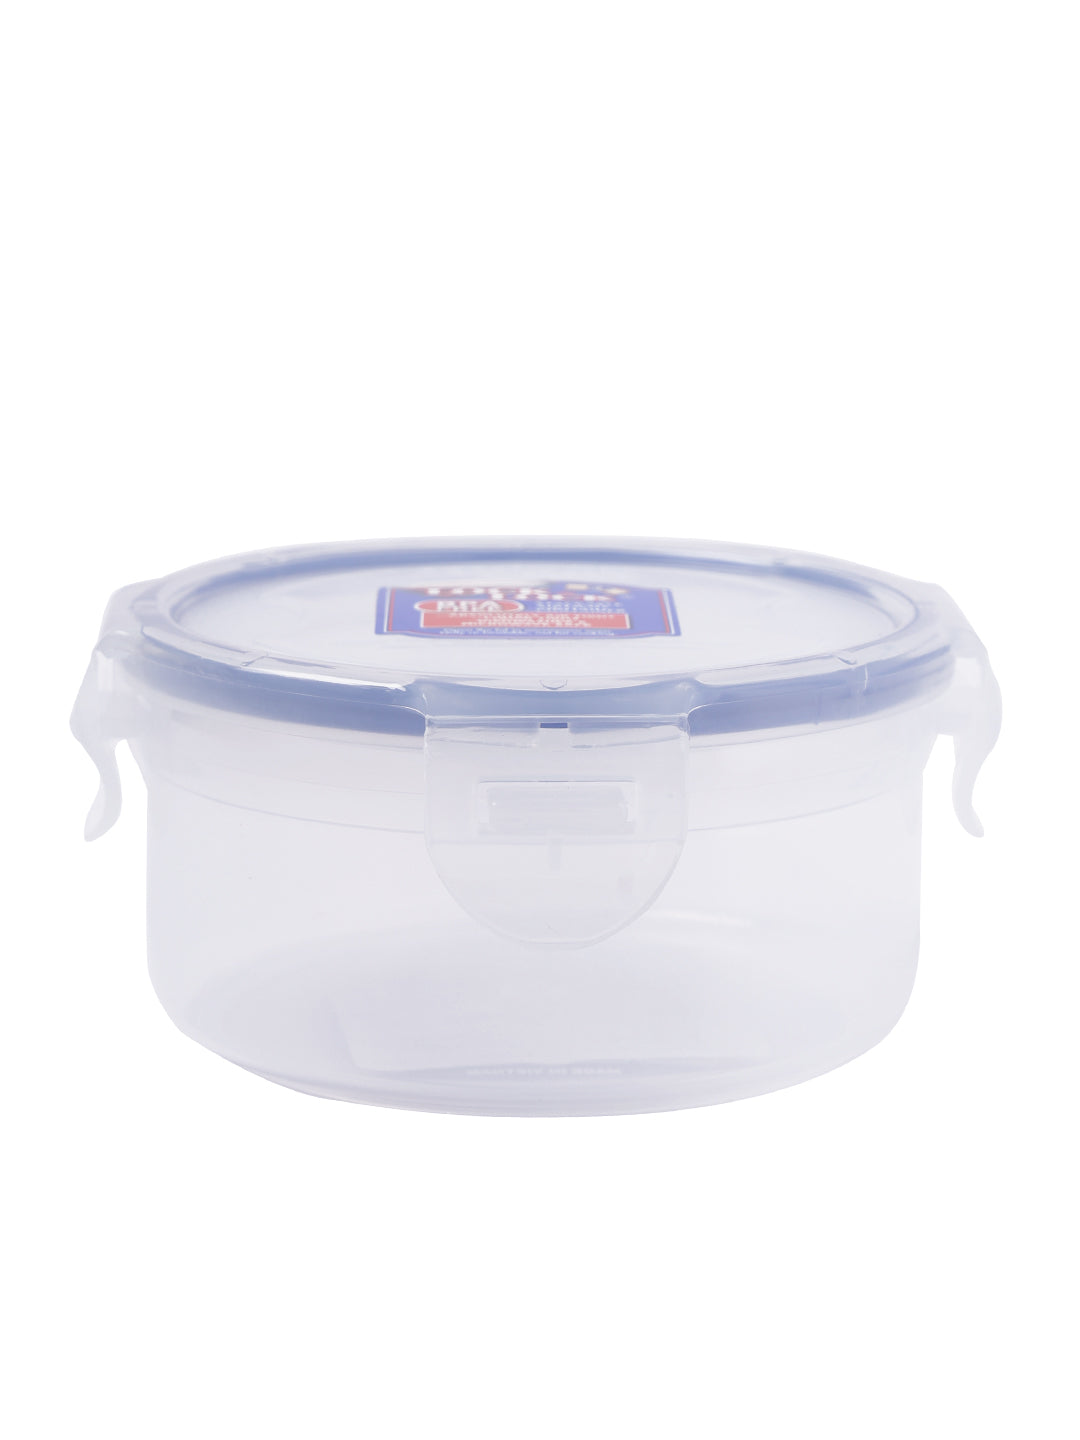 LocknLock Classics Large Round Food Container with Leak Proof Locking Lid, Clear